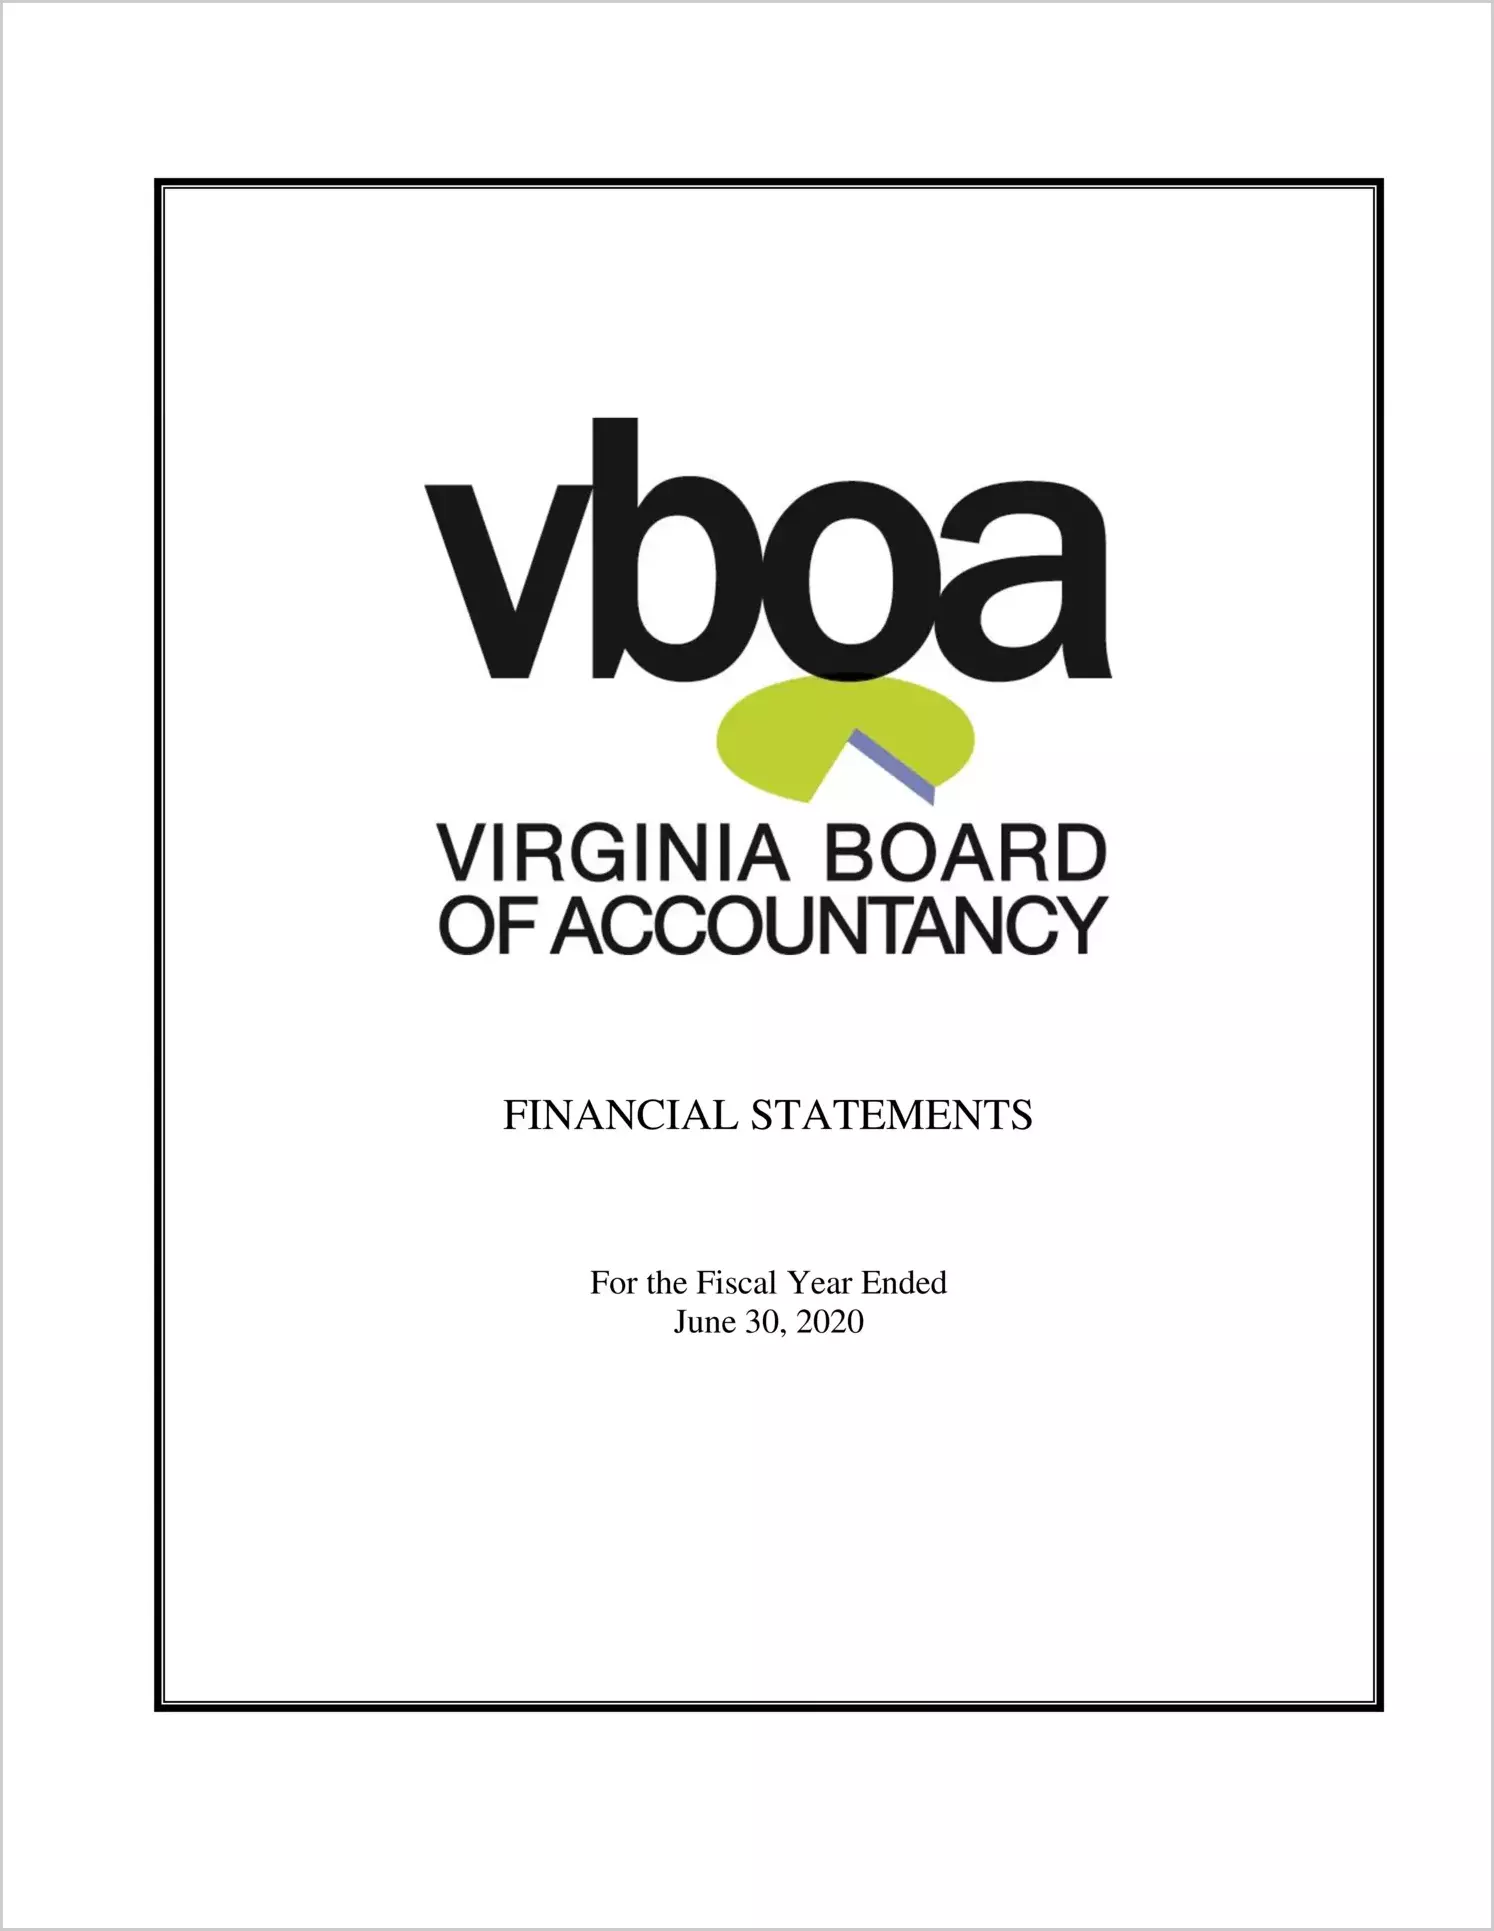 Virginia Board of Accountancy Financial Statements for the year ended June 30, 2020